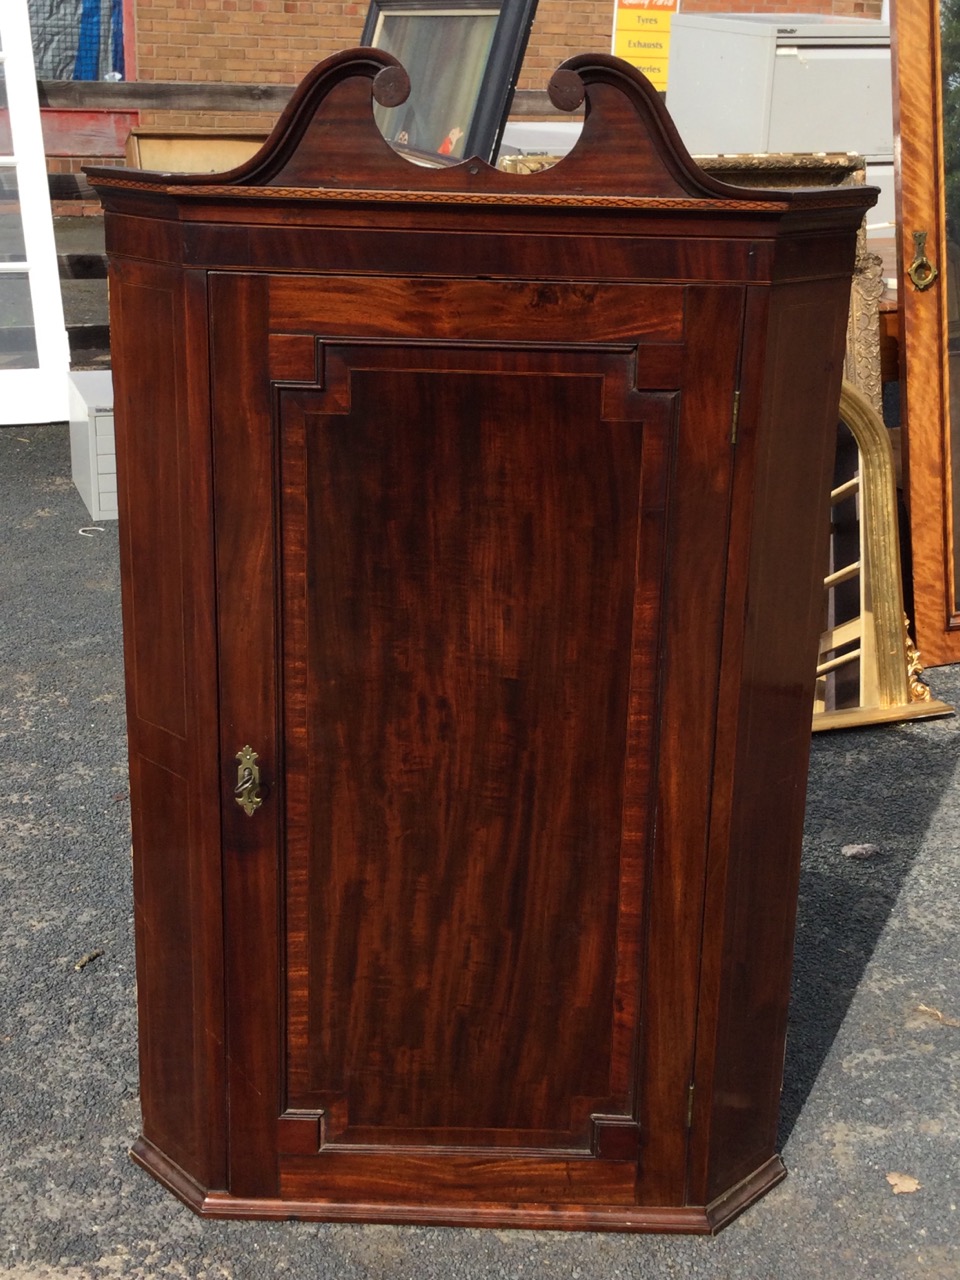 A Georgian mahogany corner cabinet with swan-neck pediment above a chequered inlaid band, having - Image 2 of 3